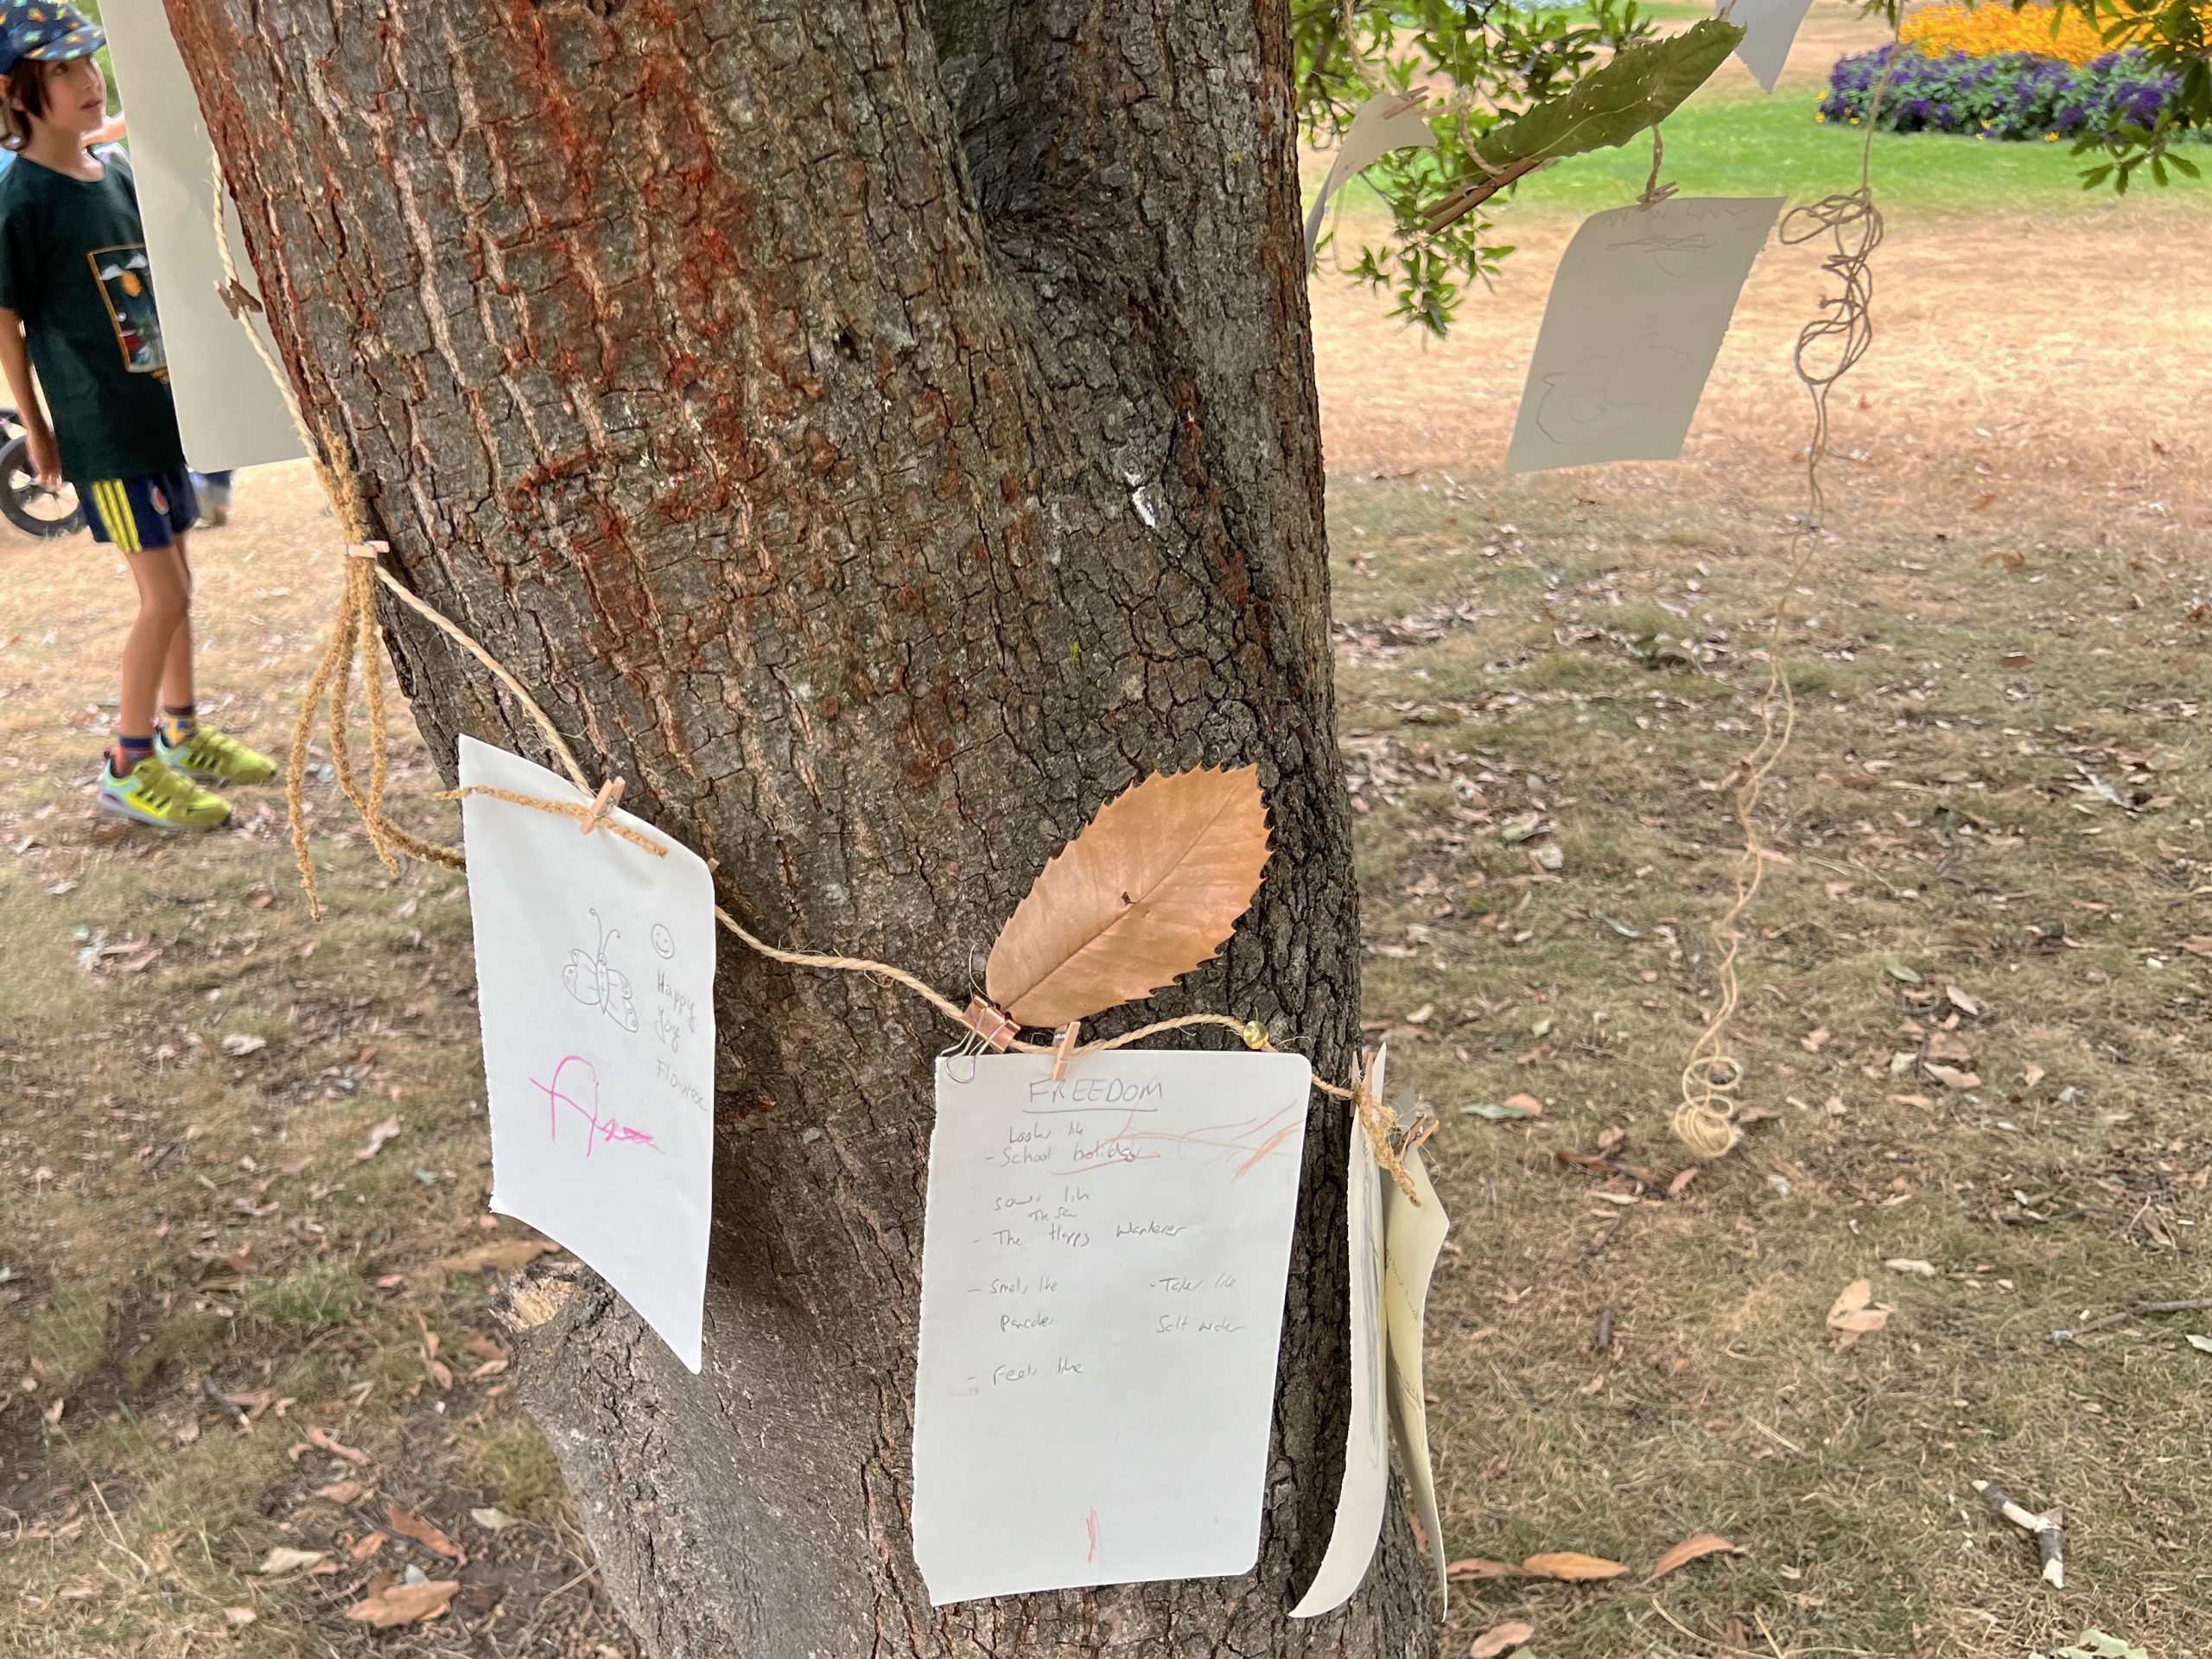 Freedom is... Pages from a poem have been attached to a tree with a thin rope. A leaf is pegged to one of the pages. Just behind the tree, we see a child looking at the pages